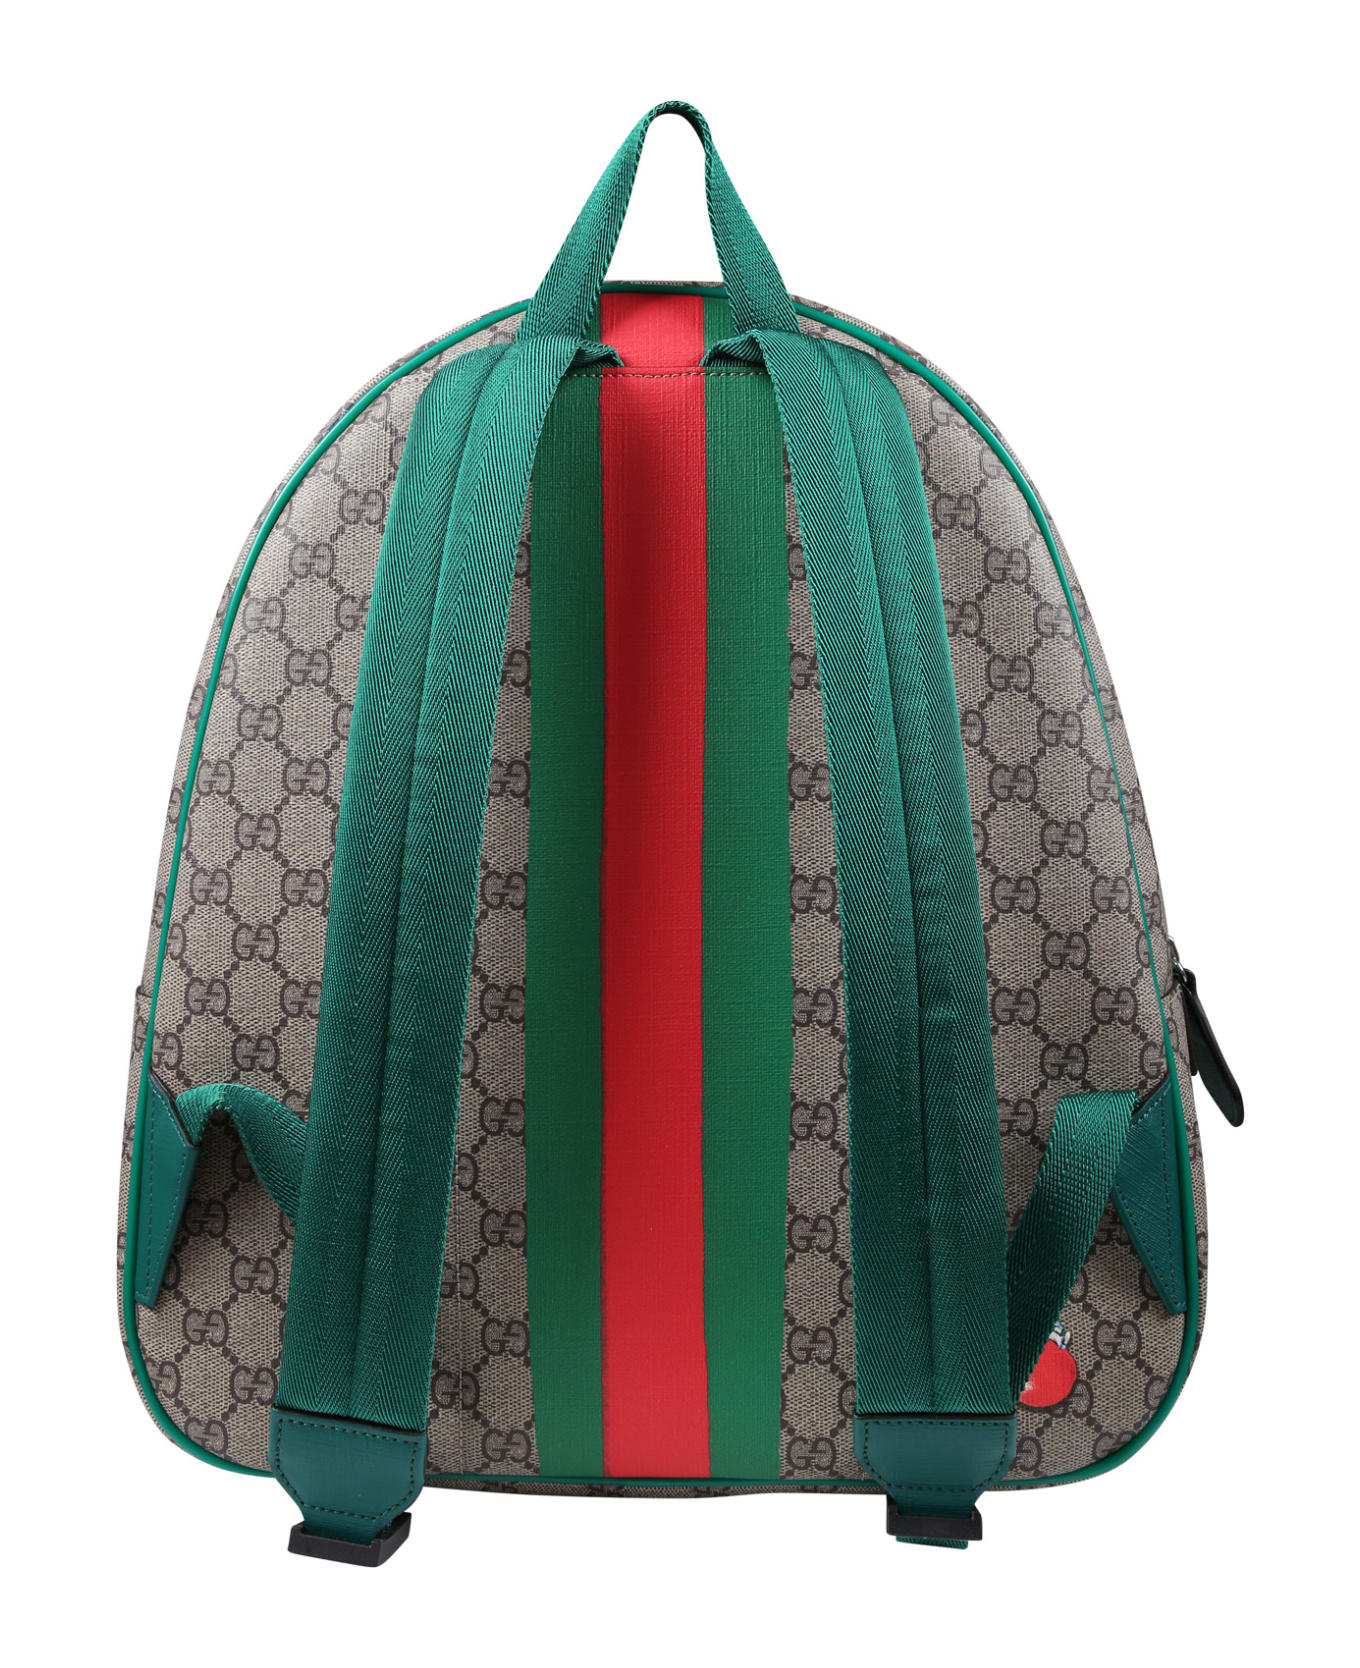 Gucci Brown Backpack For Girl With Apple Print And Logo - Brown